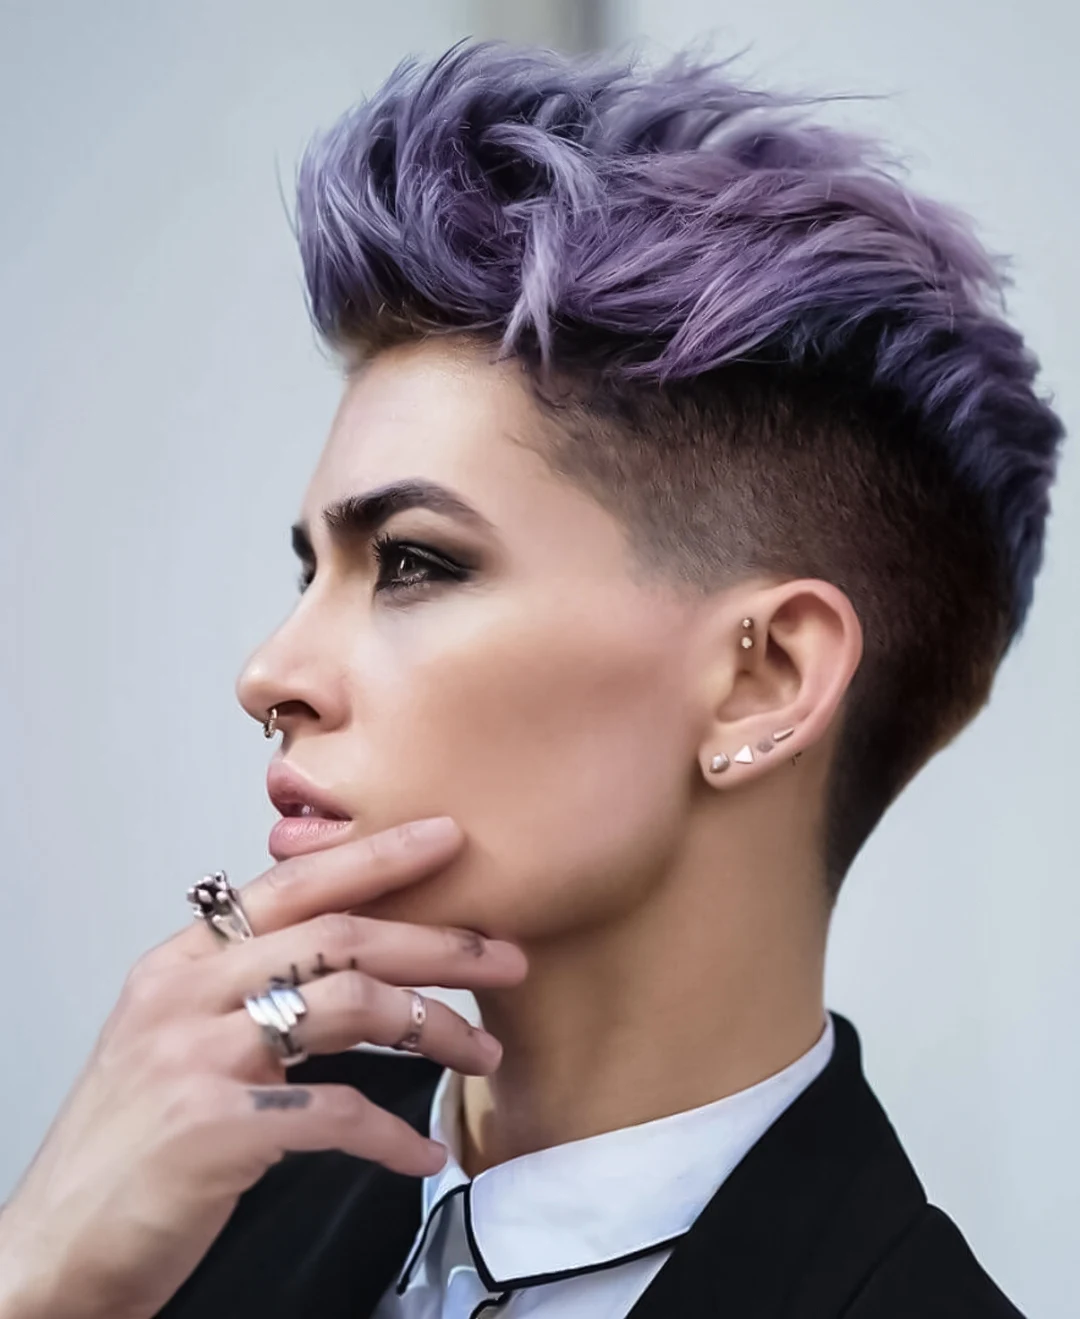 woman with purple quiff hairstyle